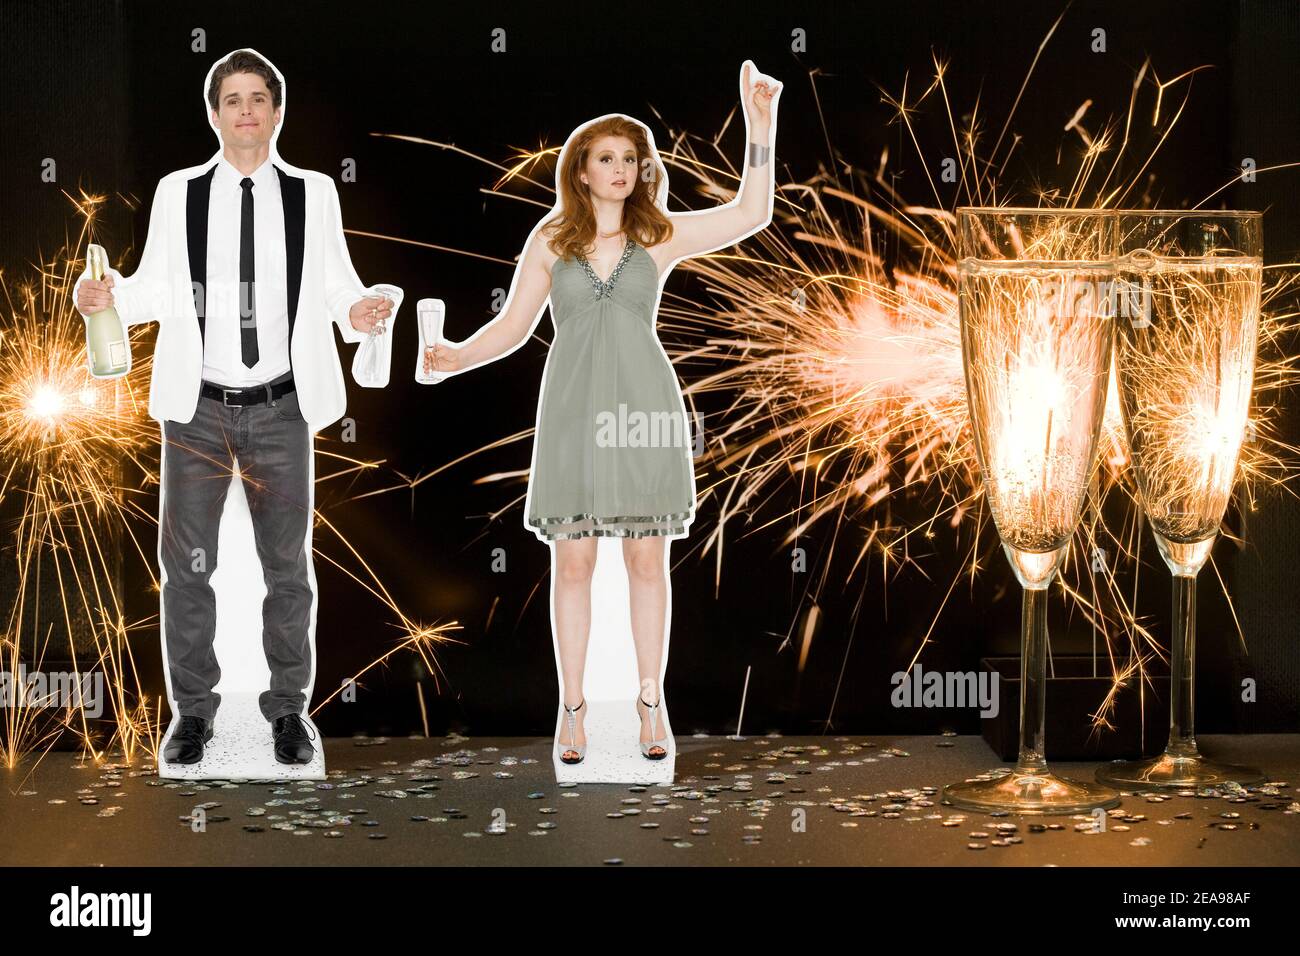 Photo collage, man and woman, in party dress, with champagne glasses, in front of a photo of fireworks, dark background, white jacket, green dress Stock Photo